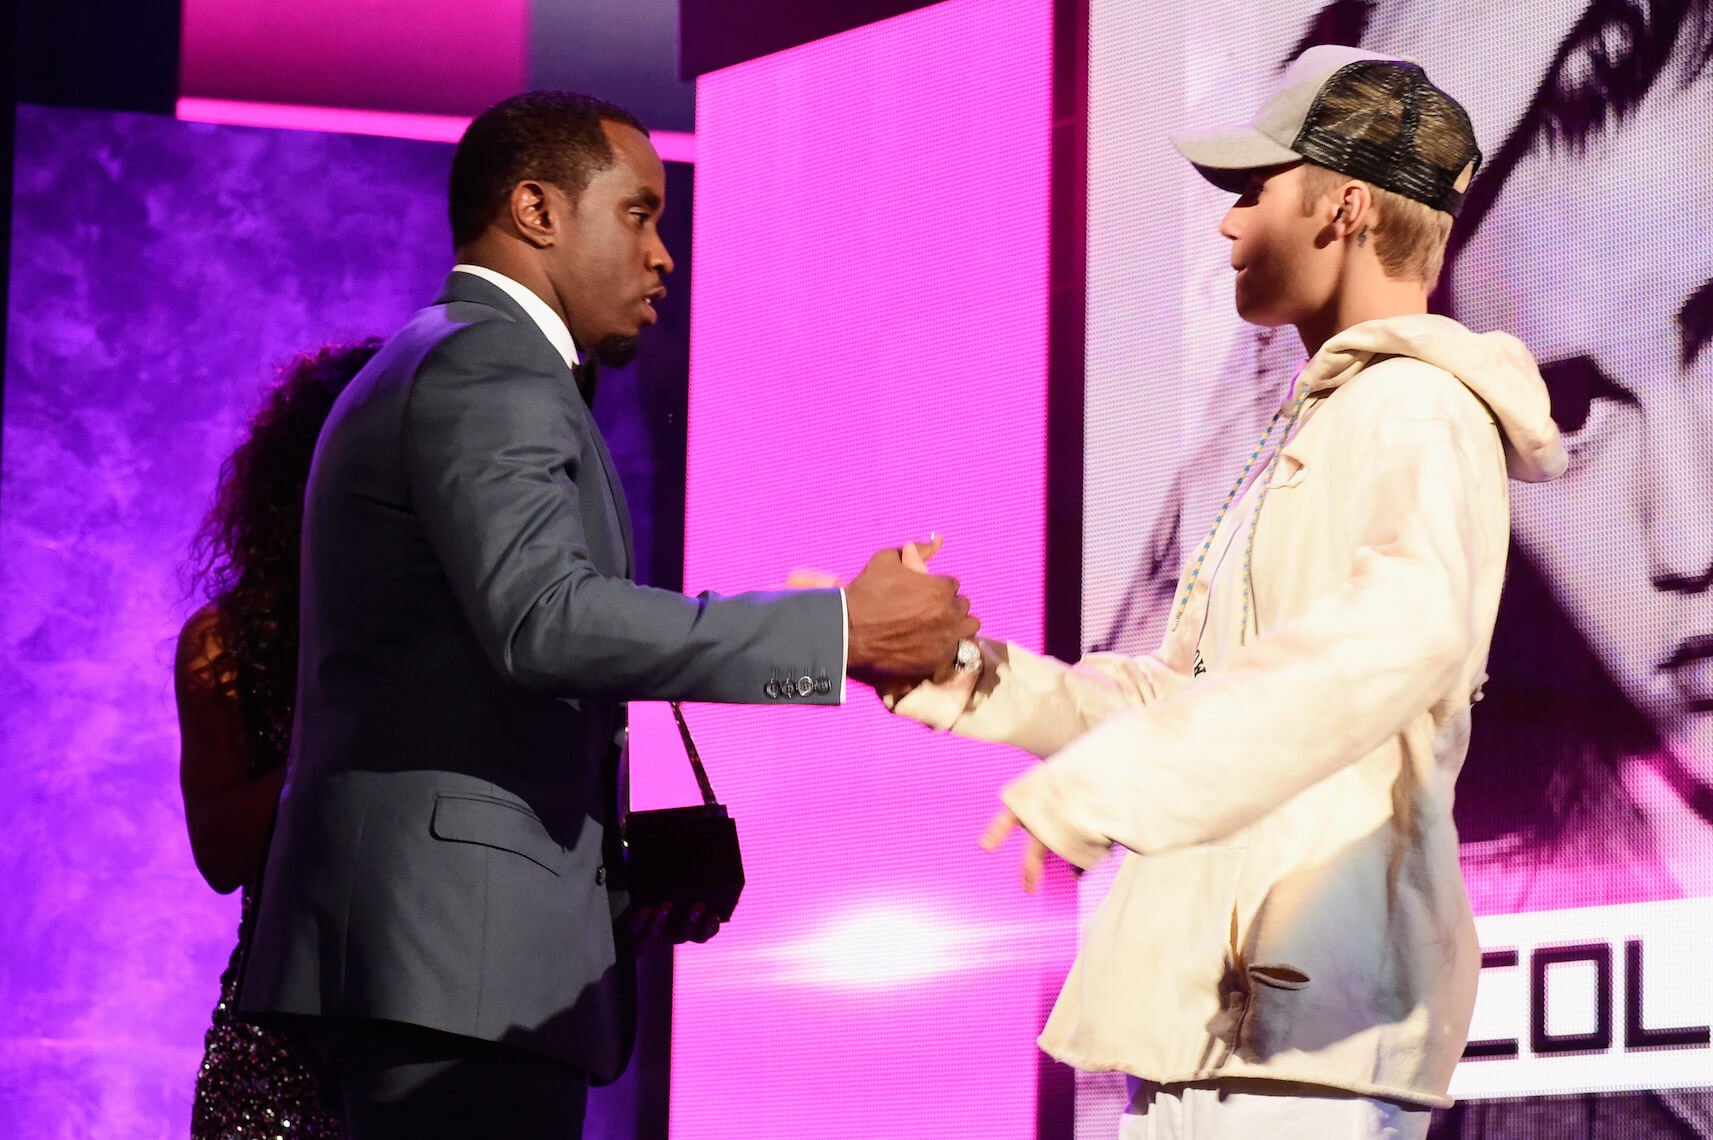 Sean 'P. Diddy' Combs and Justin Bieber shaking hands against a purple background at the 2015 American Music Awards